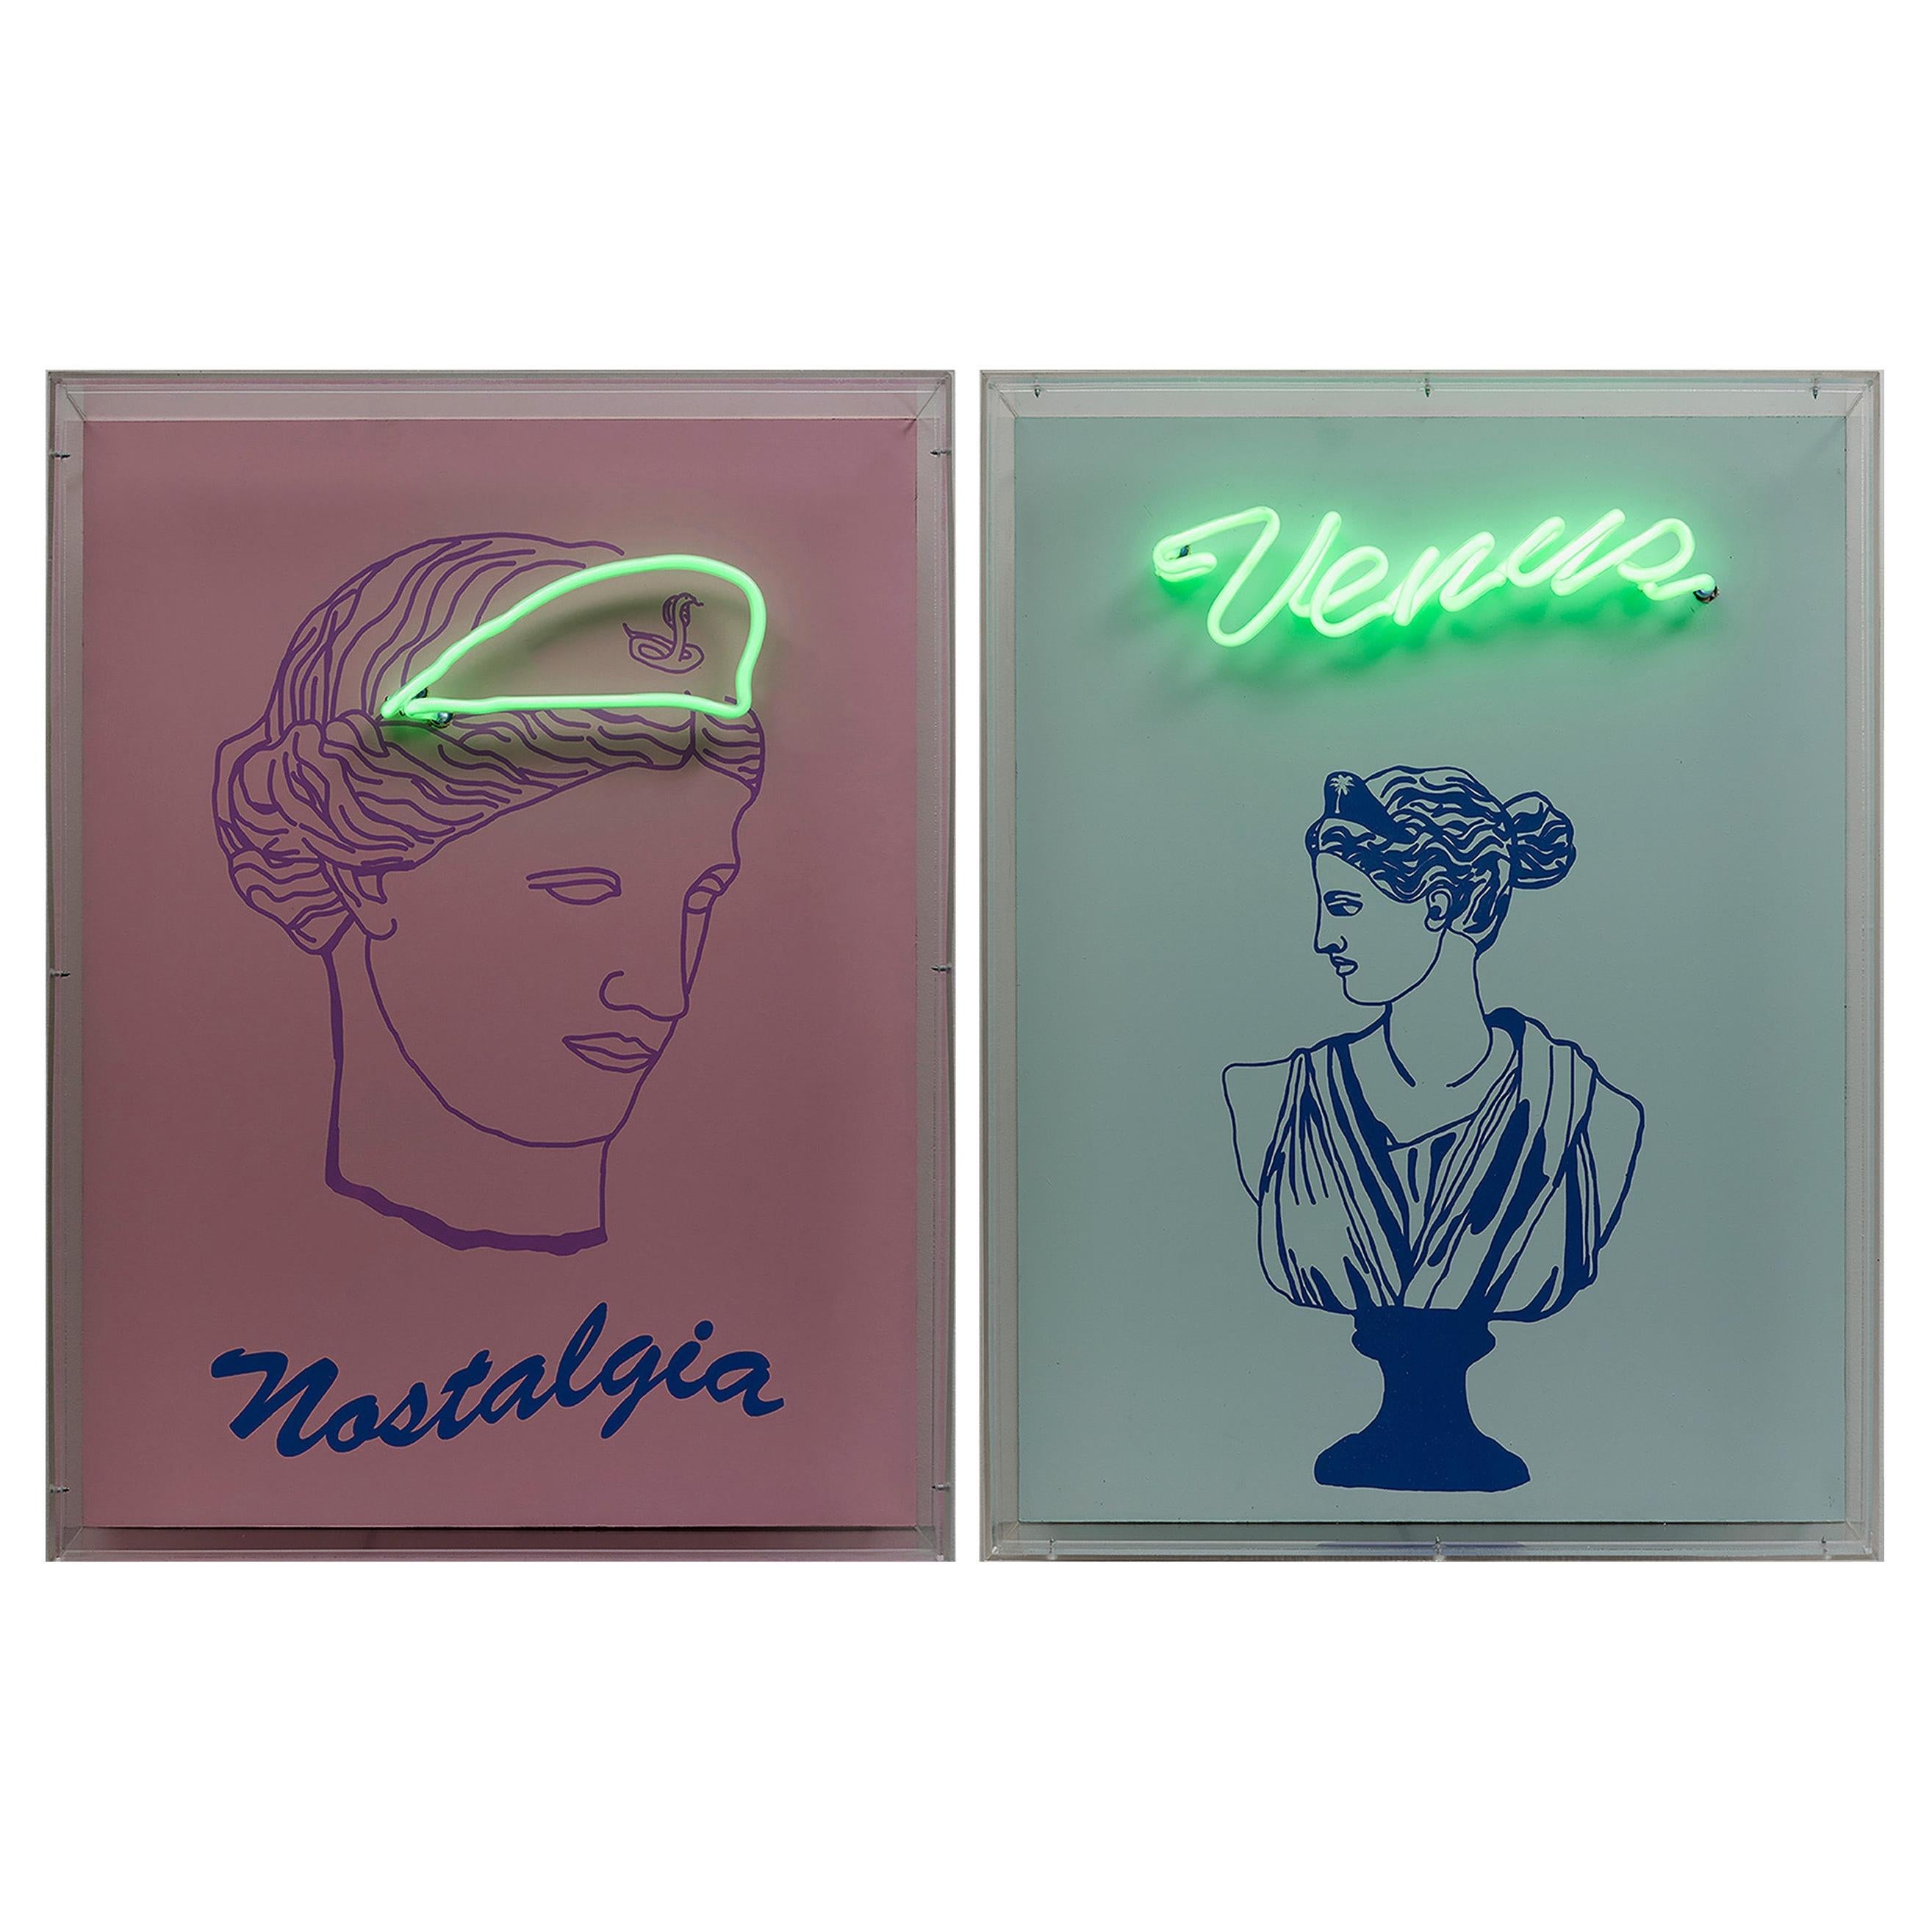 Nostalgia and Venus Diptych. Neon Light Box Wall Sculpture.  For Sale